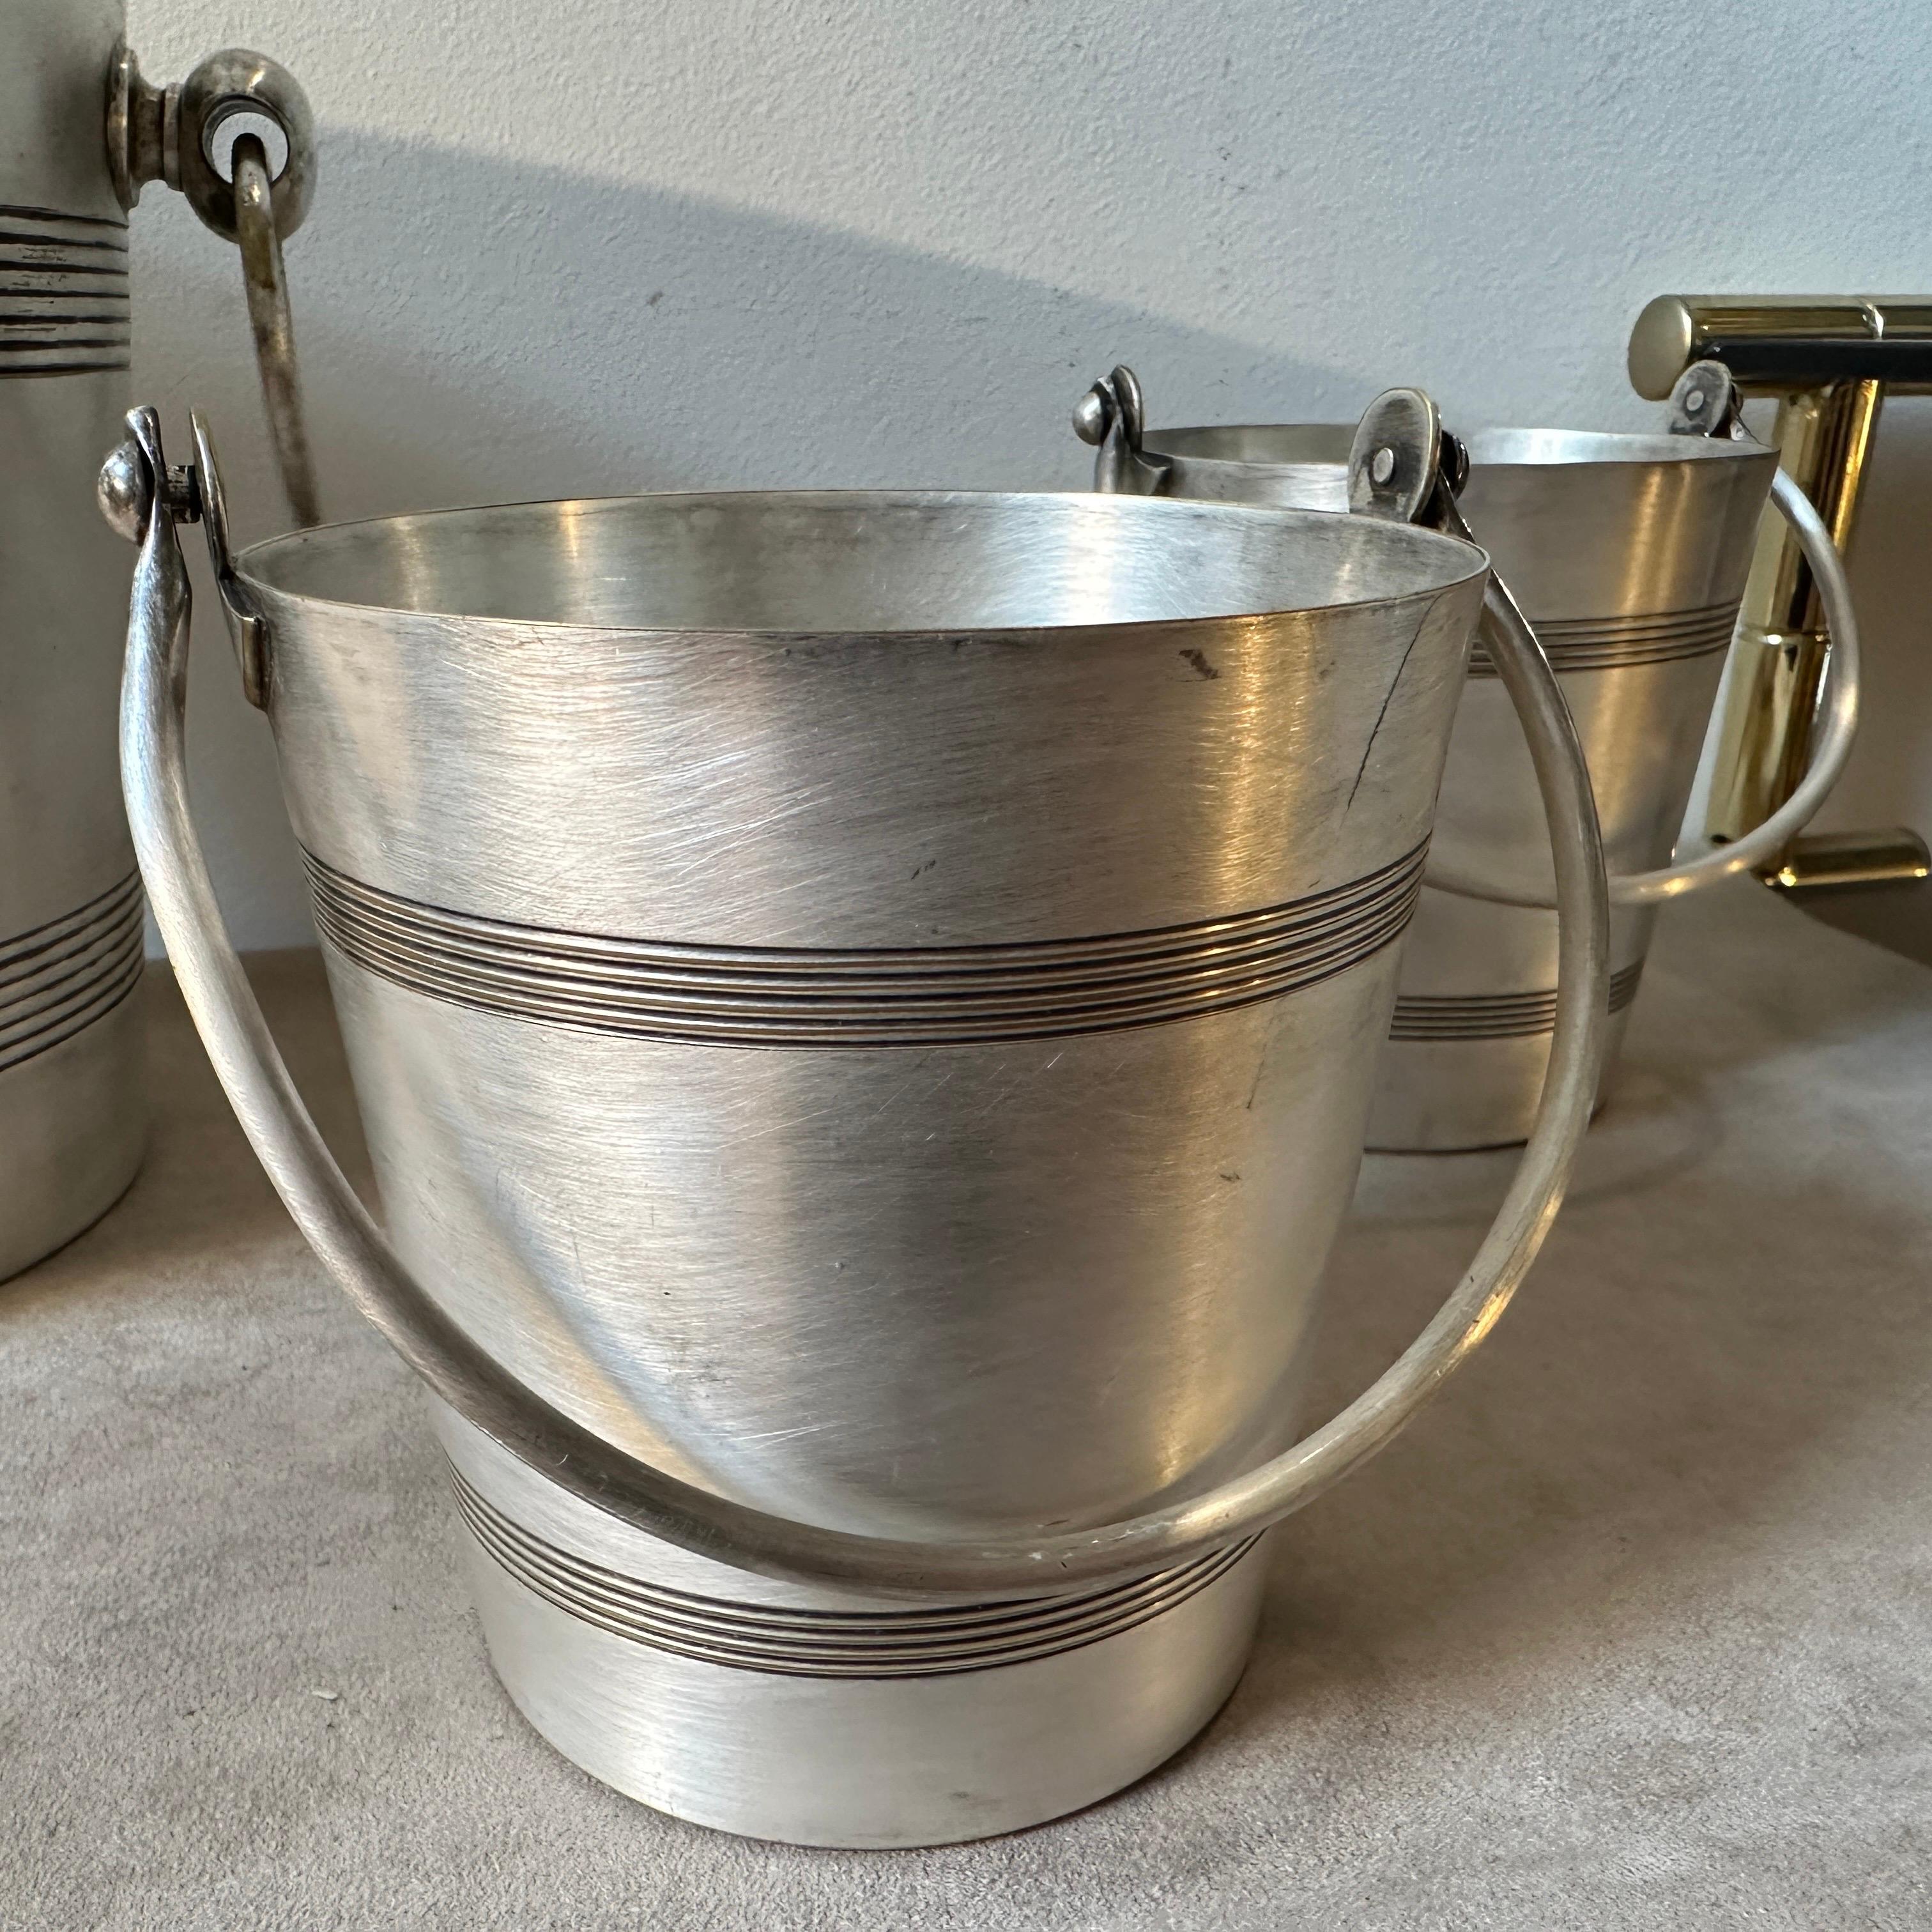 1930s Art Deco Aluminum French Wine Cooler and Two Ice Bucket by Reneka For Sale 5